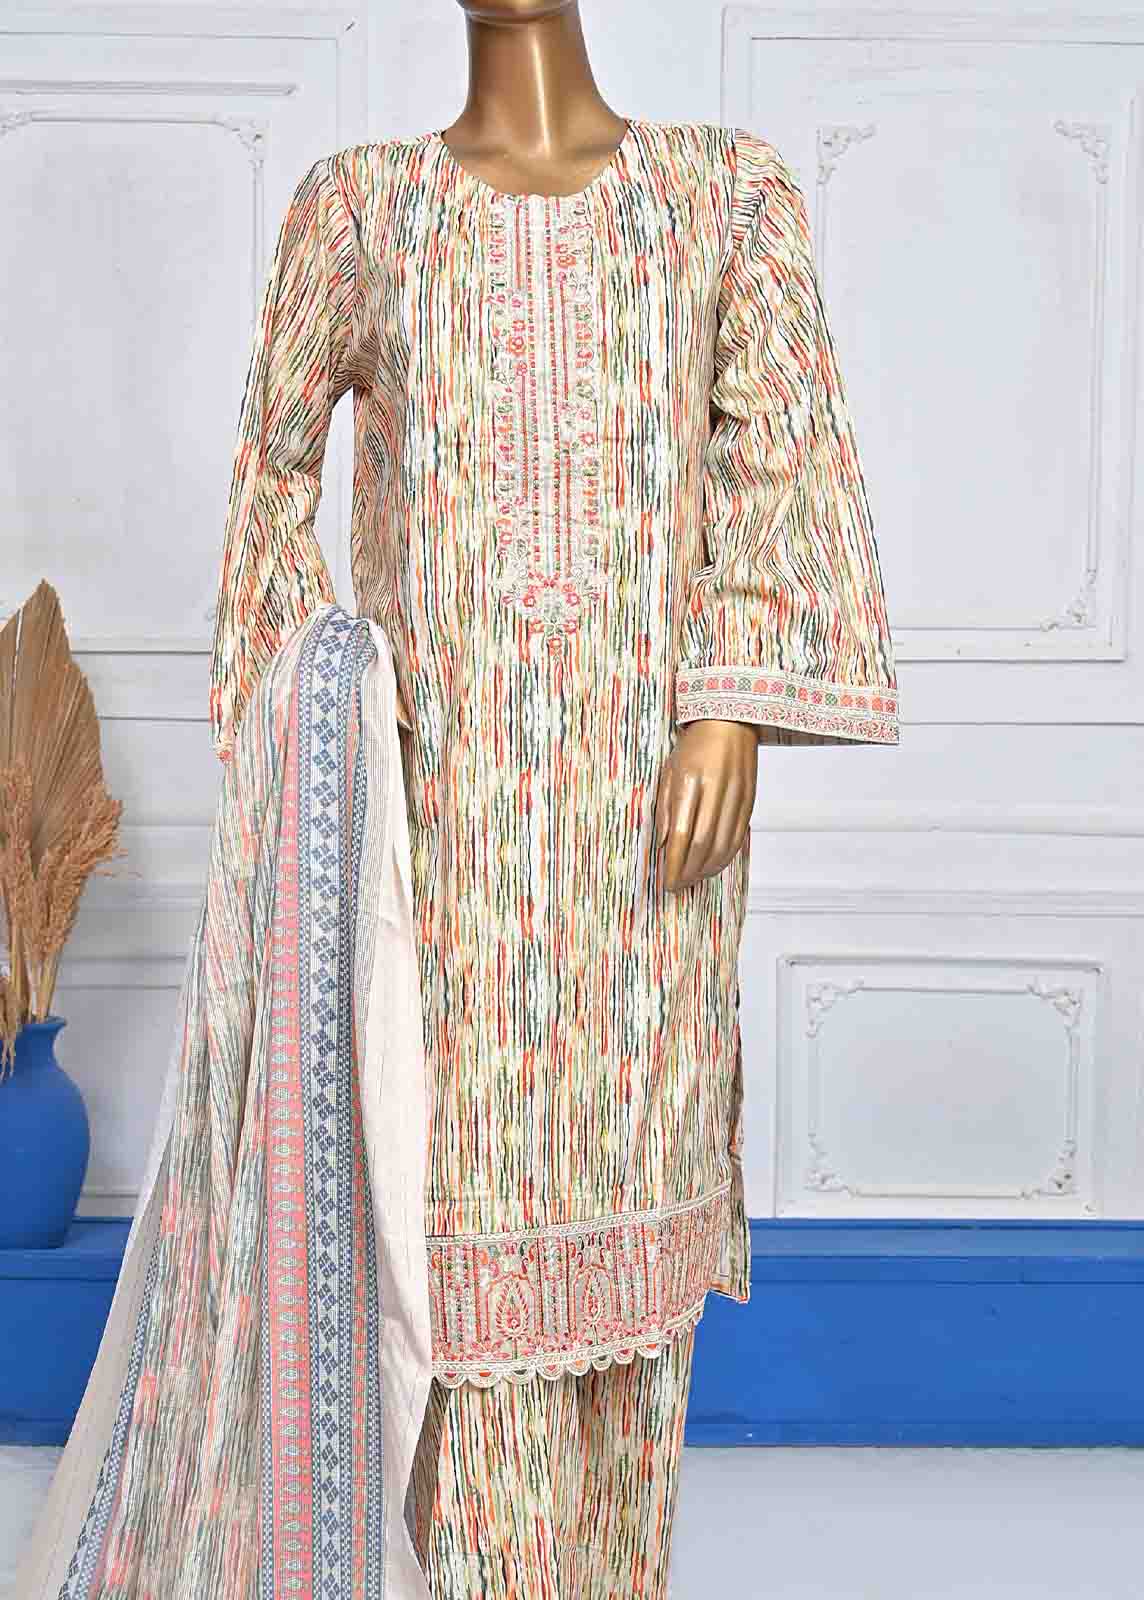 SMLE-0071-3 Piece Cotton Embroidered